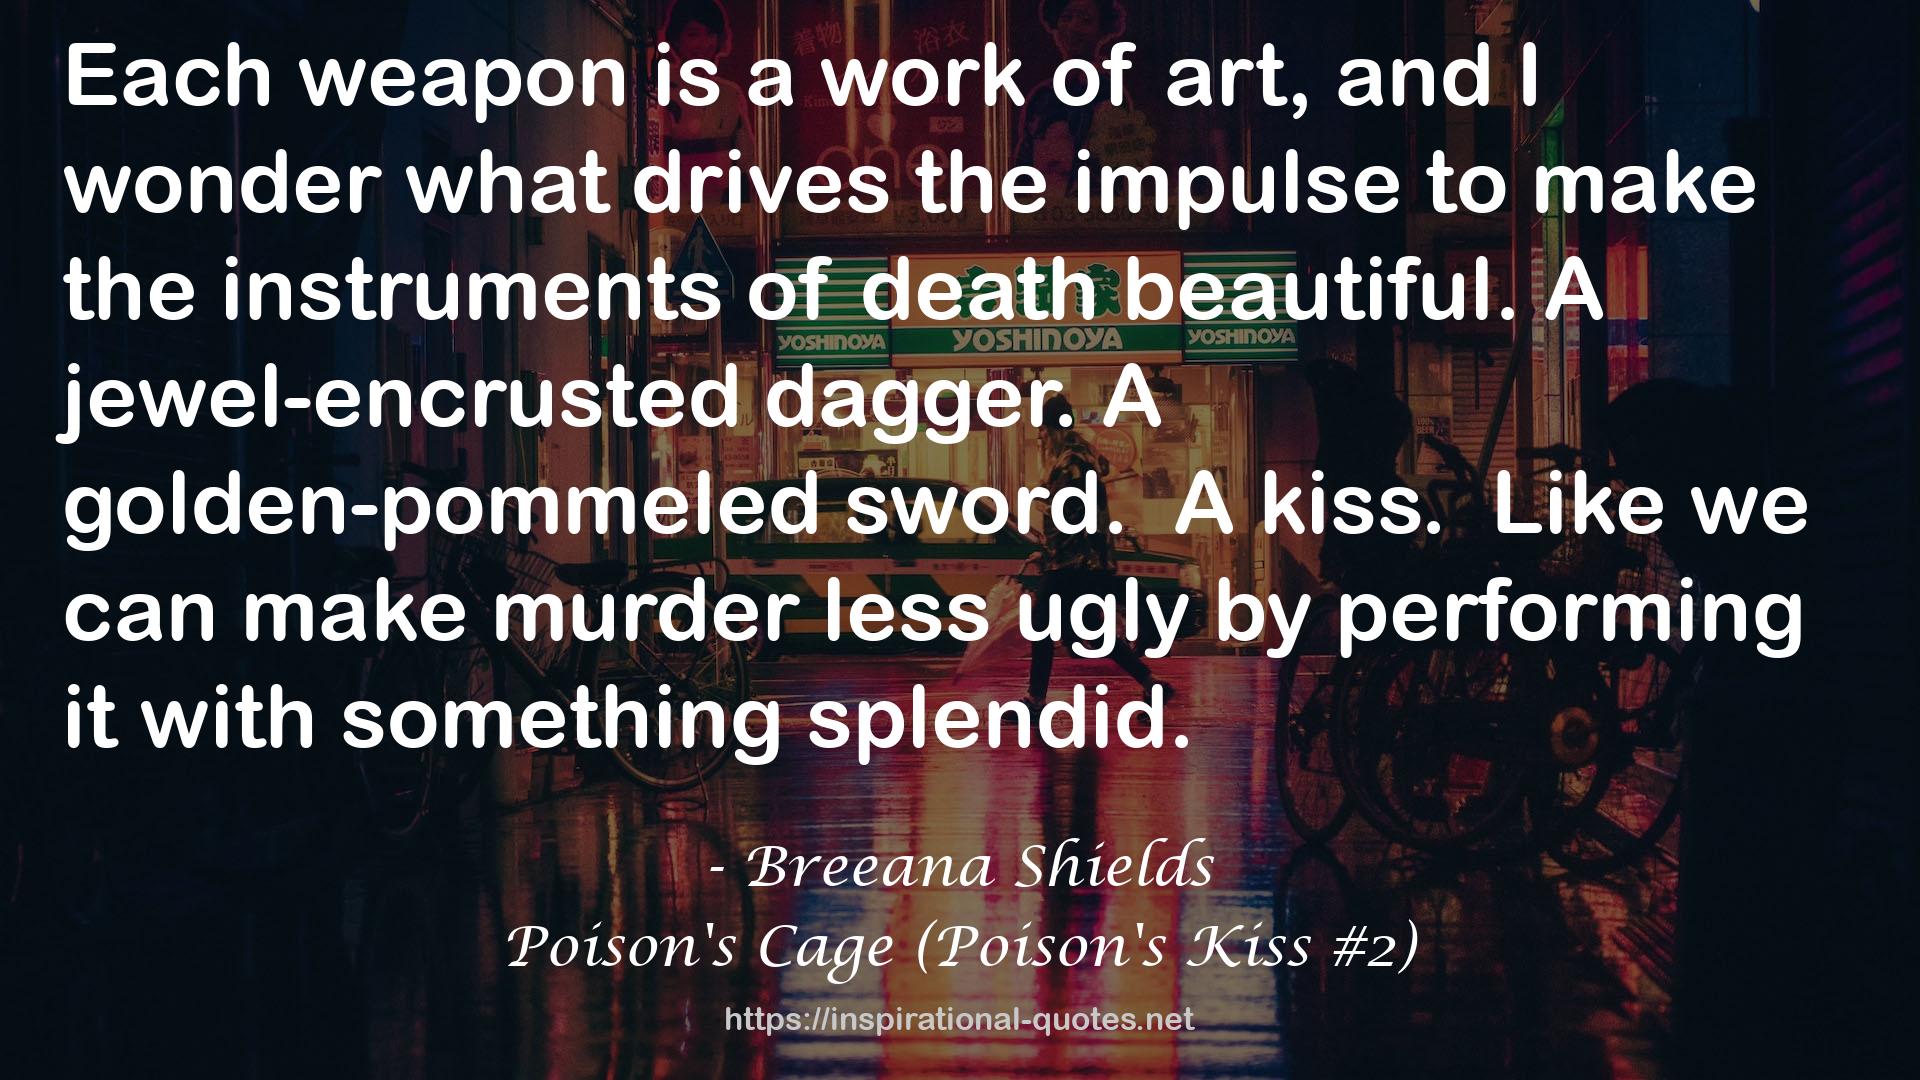 Poison's Cage (Poison's Kiss #2) QUOTES